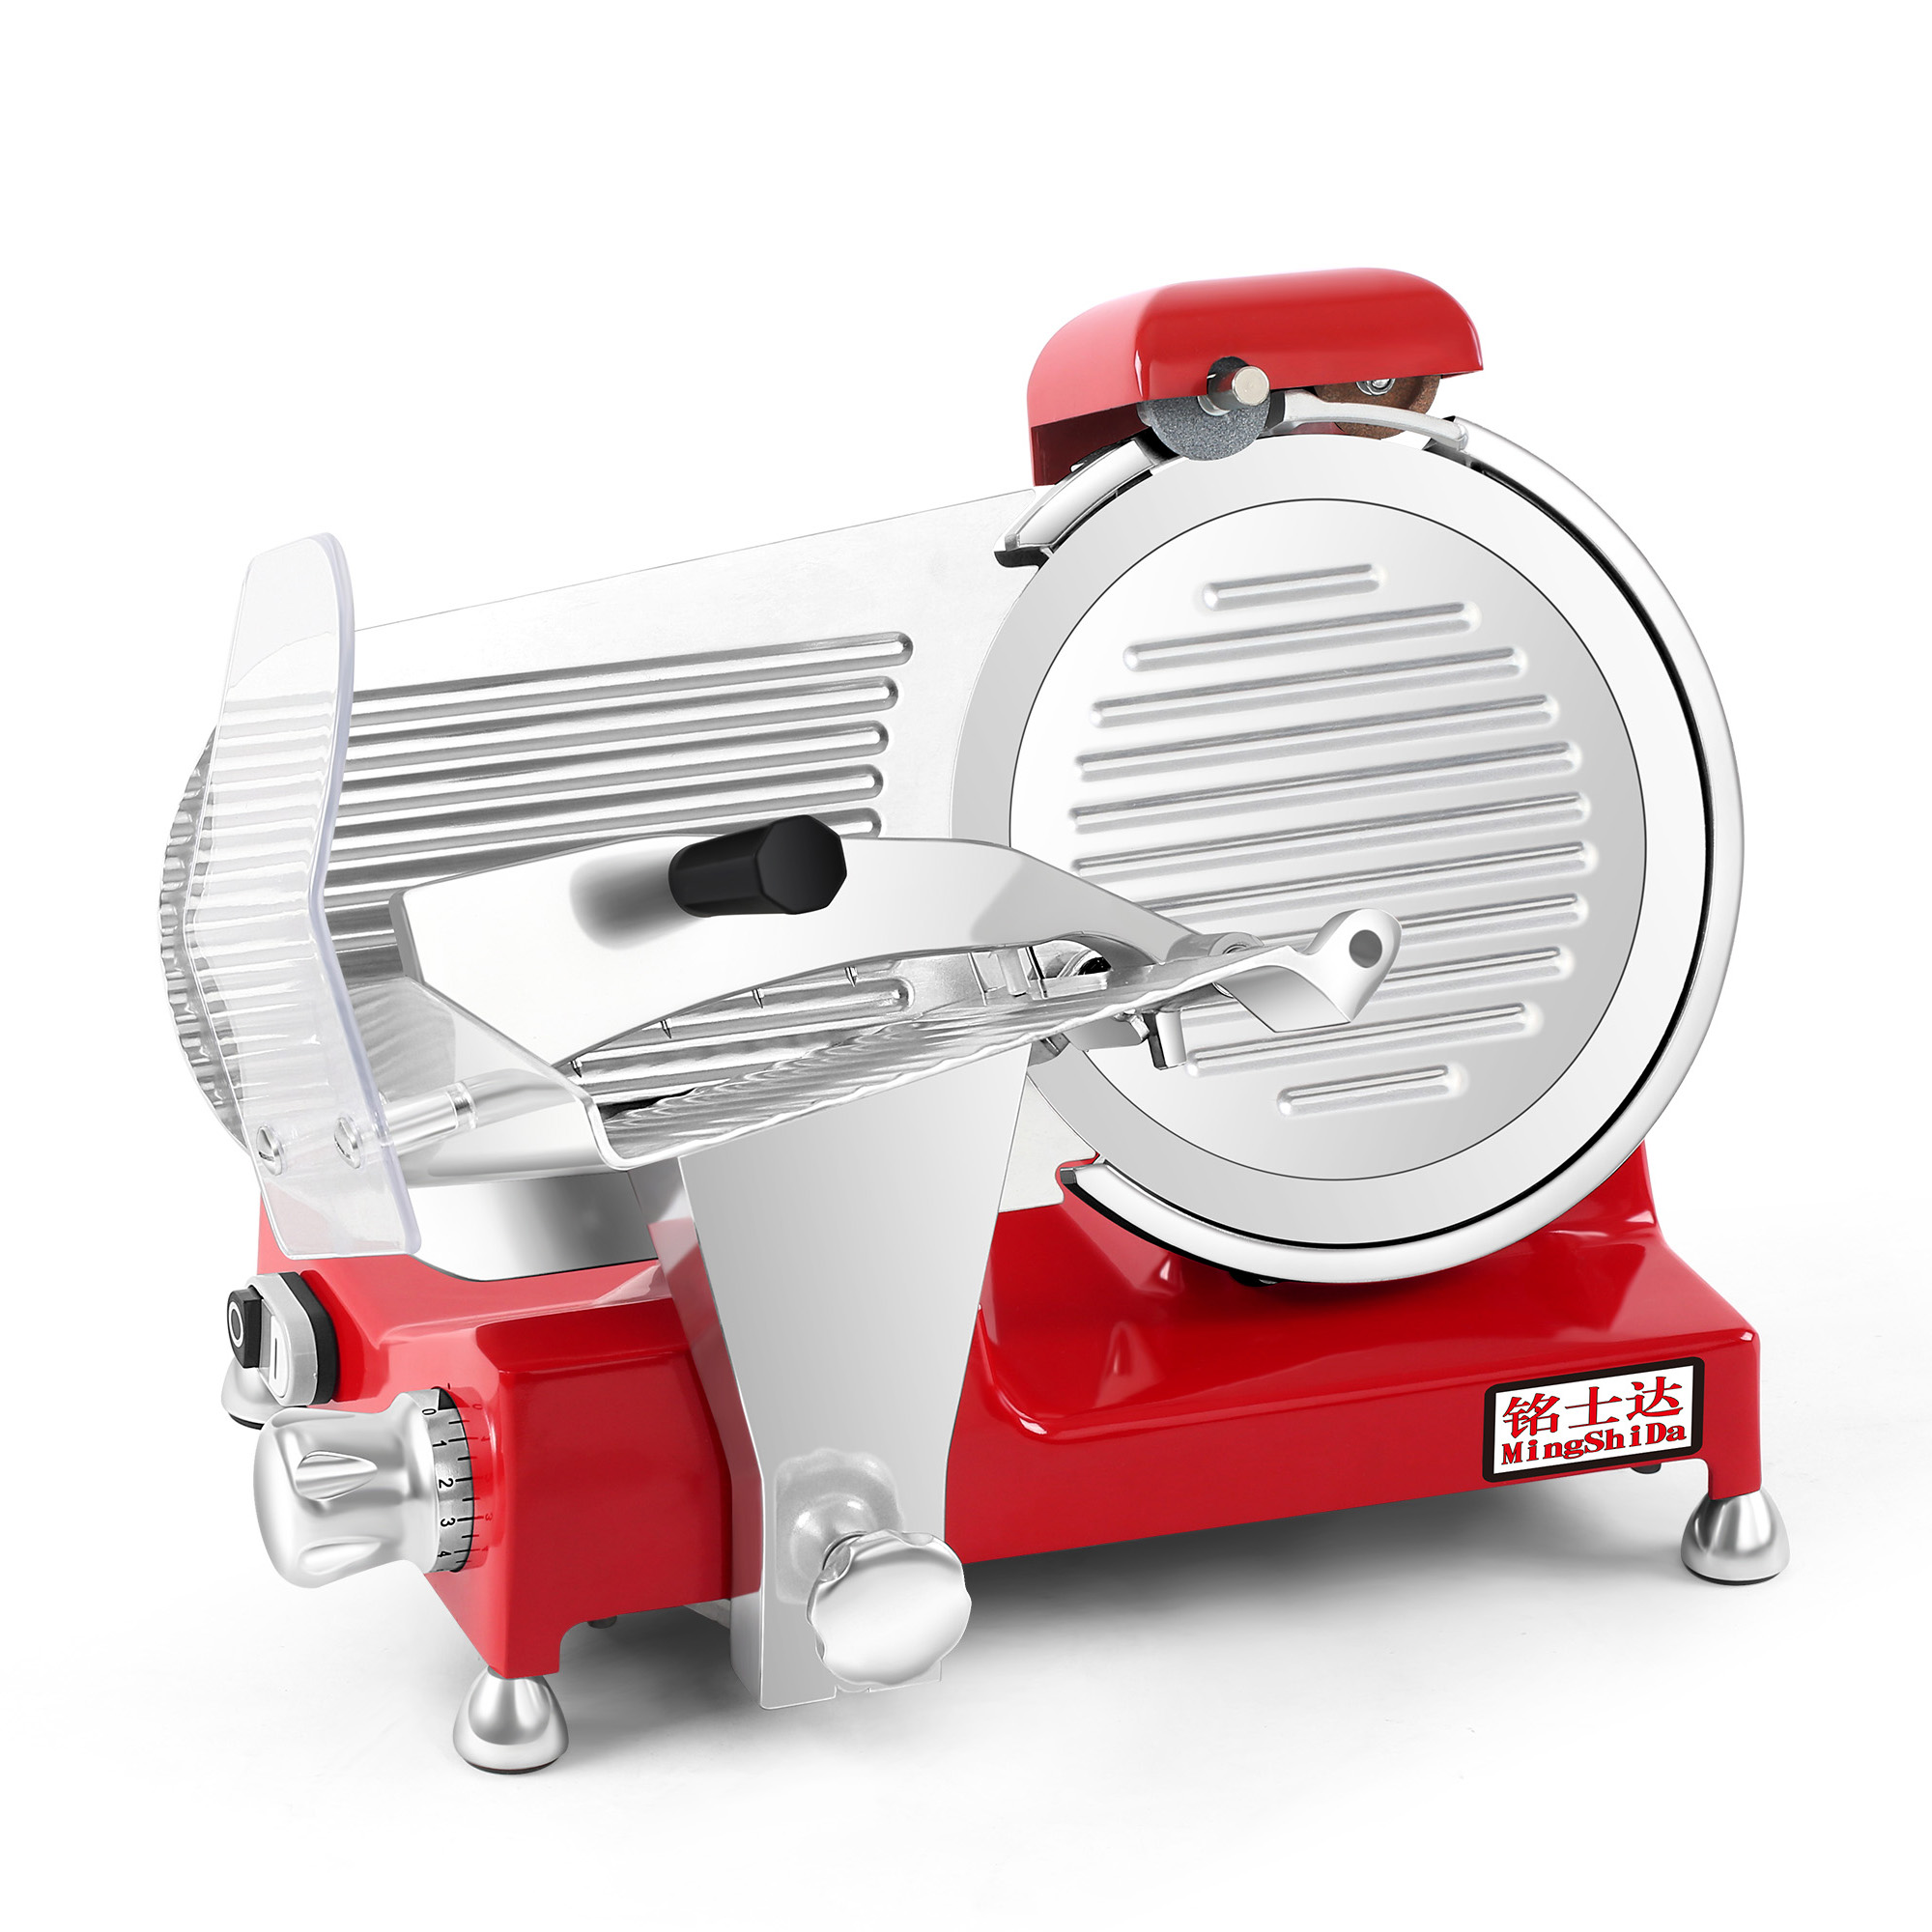 10 MEAT SLICER MSD-250 WITH CE CERTIFICATE